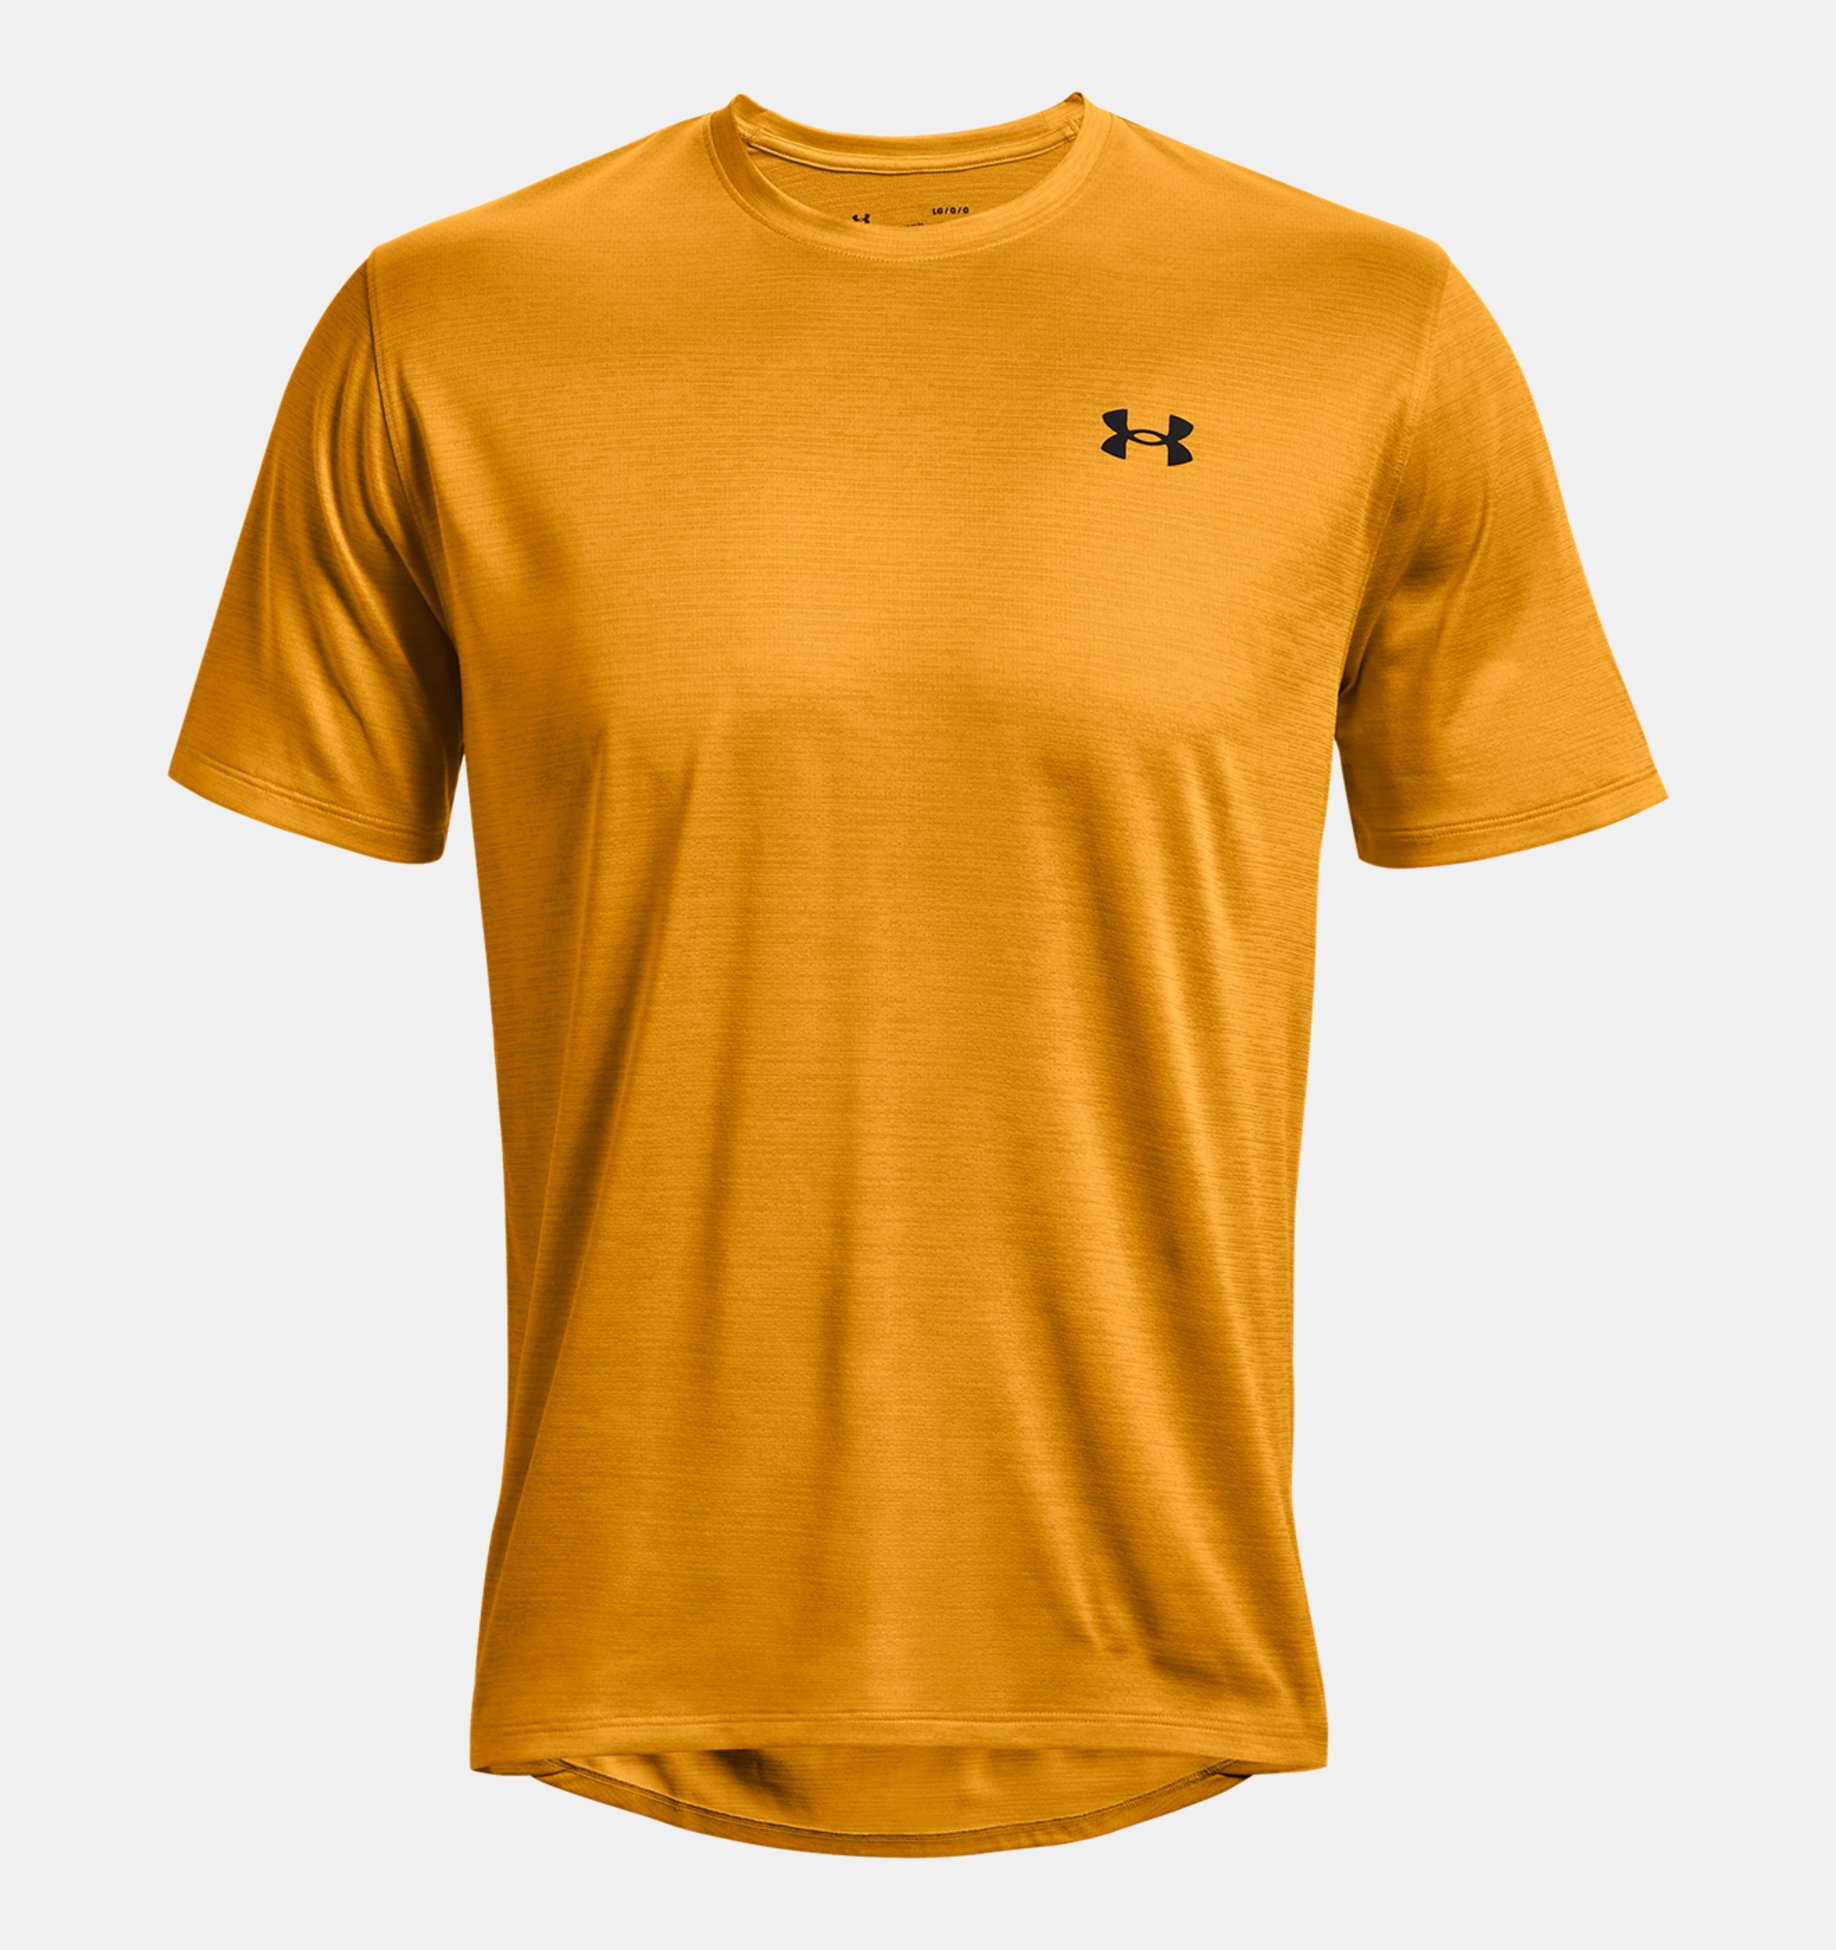 2022 Under Armour Mens Fitted T-Shirt UA Training Gym Running Yoga Tee Top